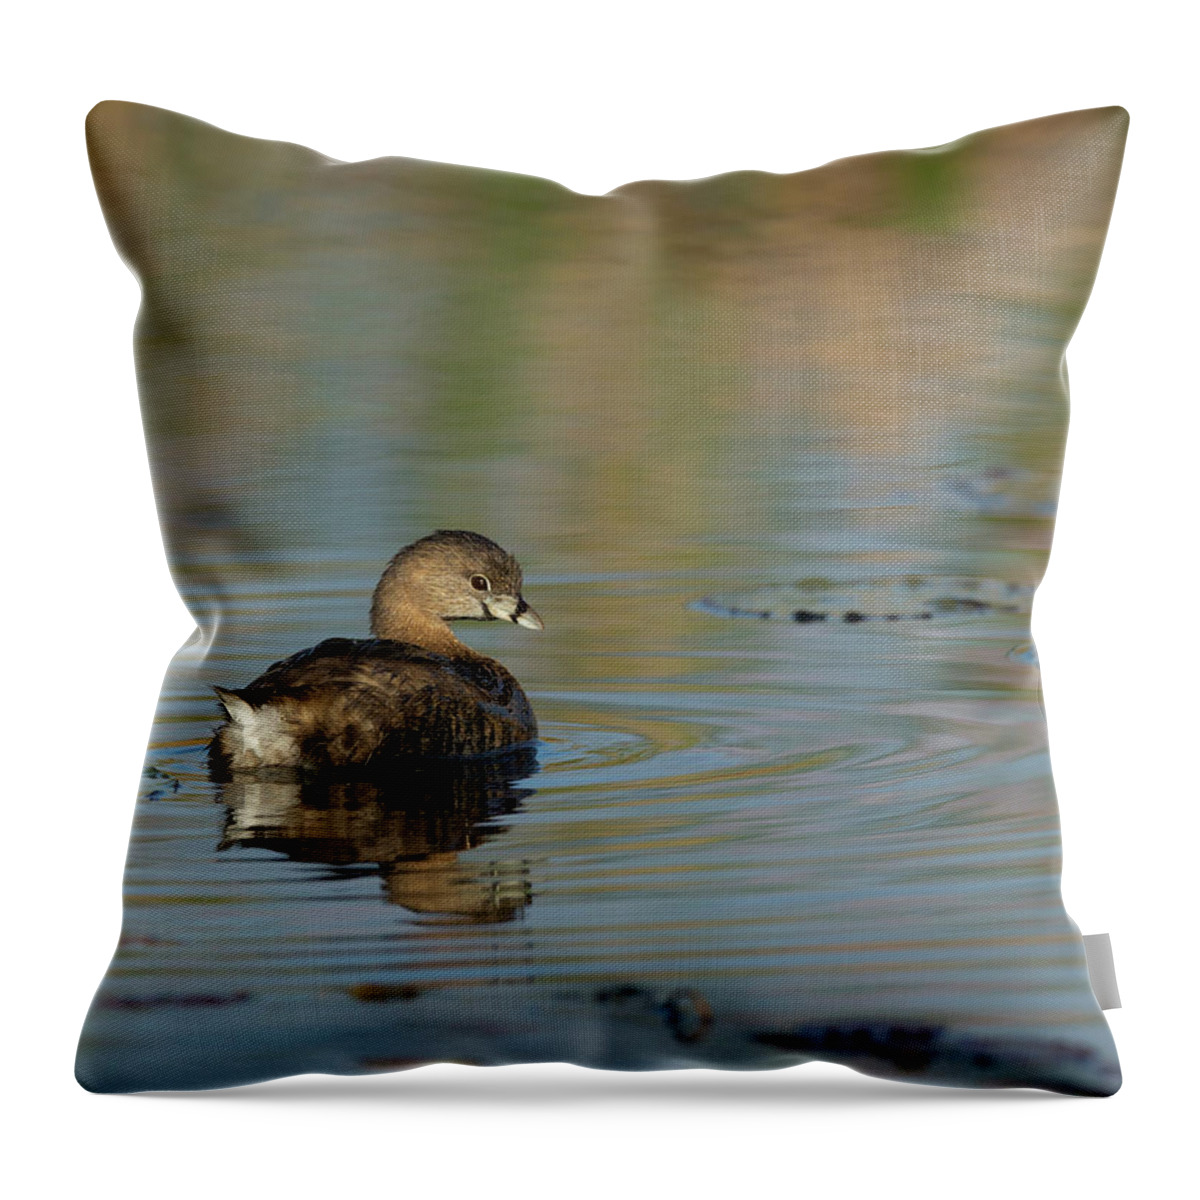 Florida Birds Throw Pillow featuring the photograph Pied-billed Grebe by Maresa Pryor-Luzier